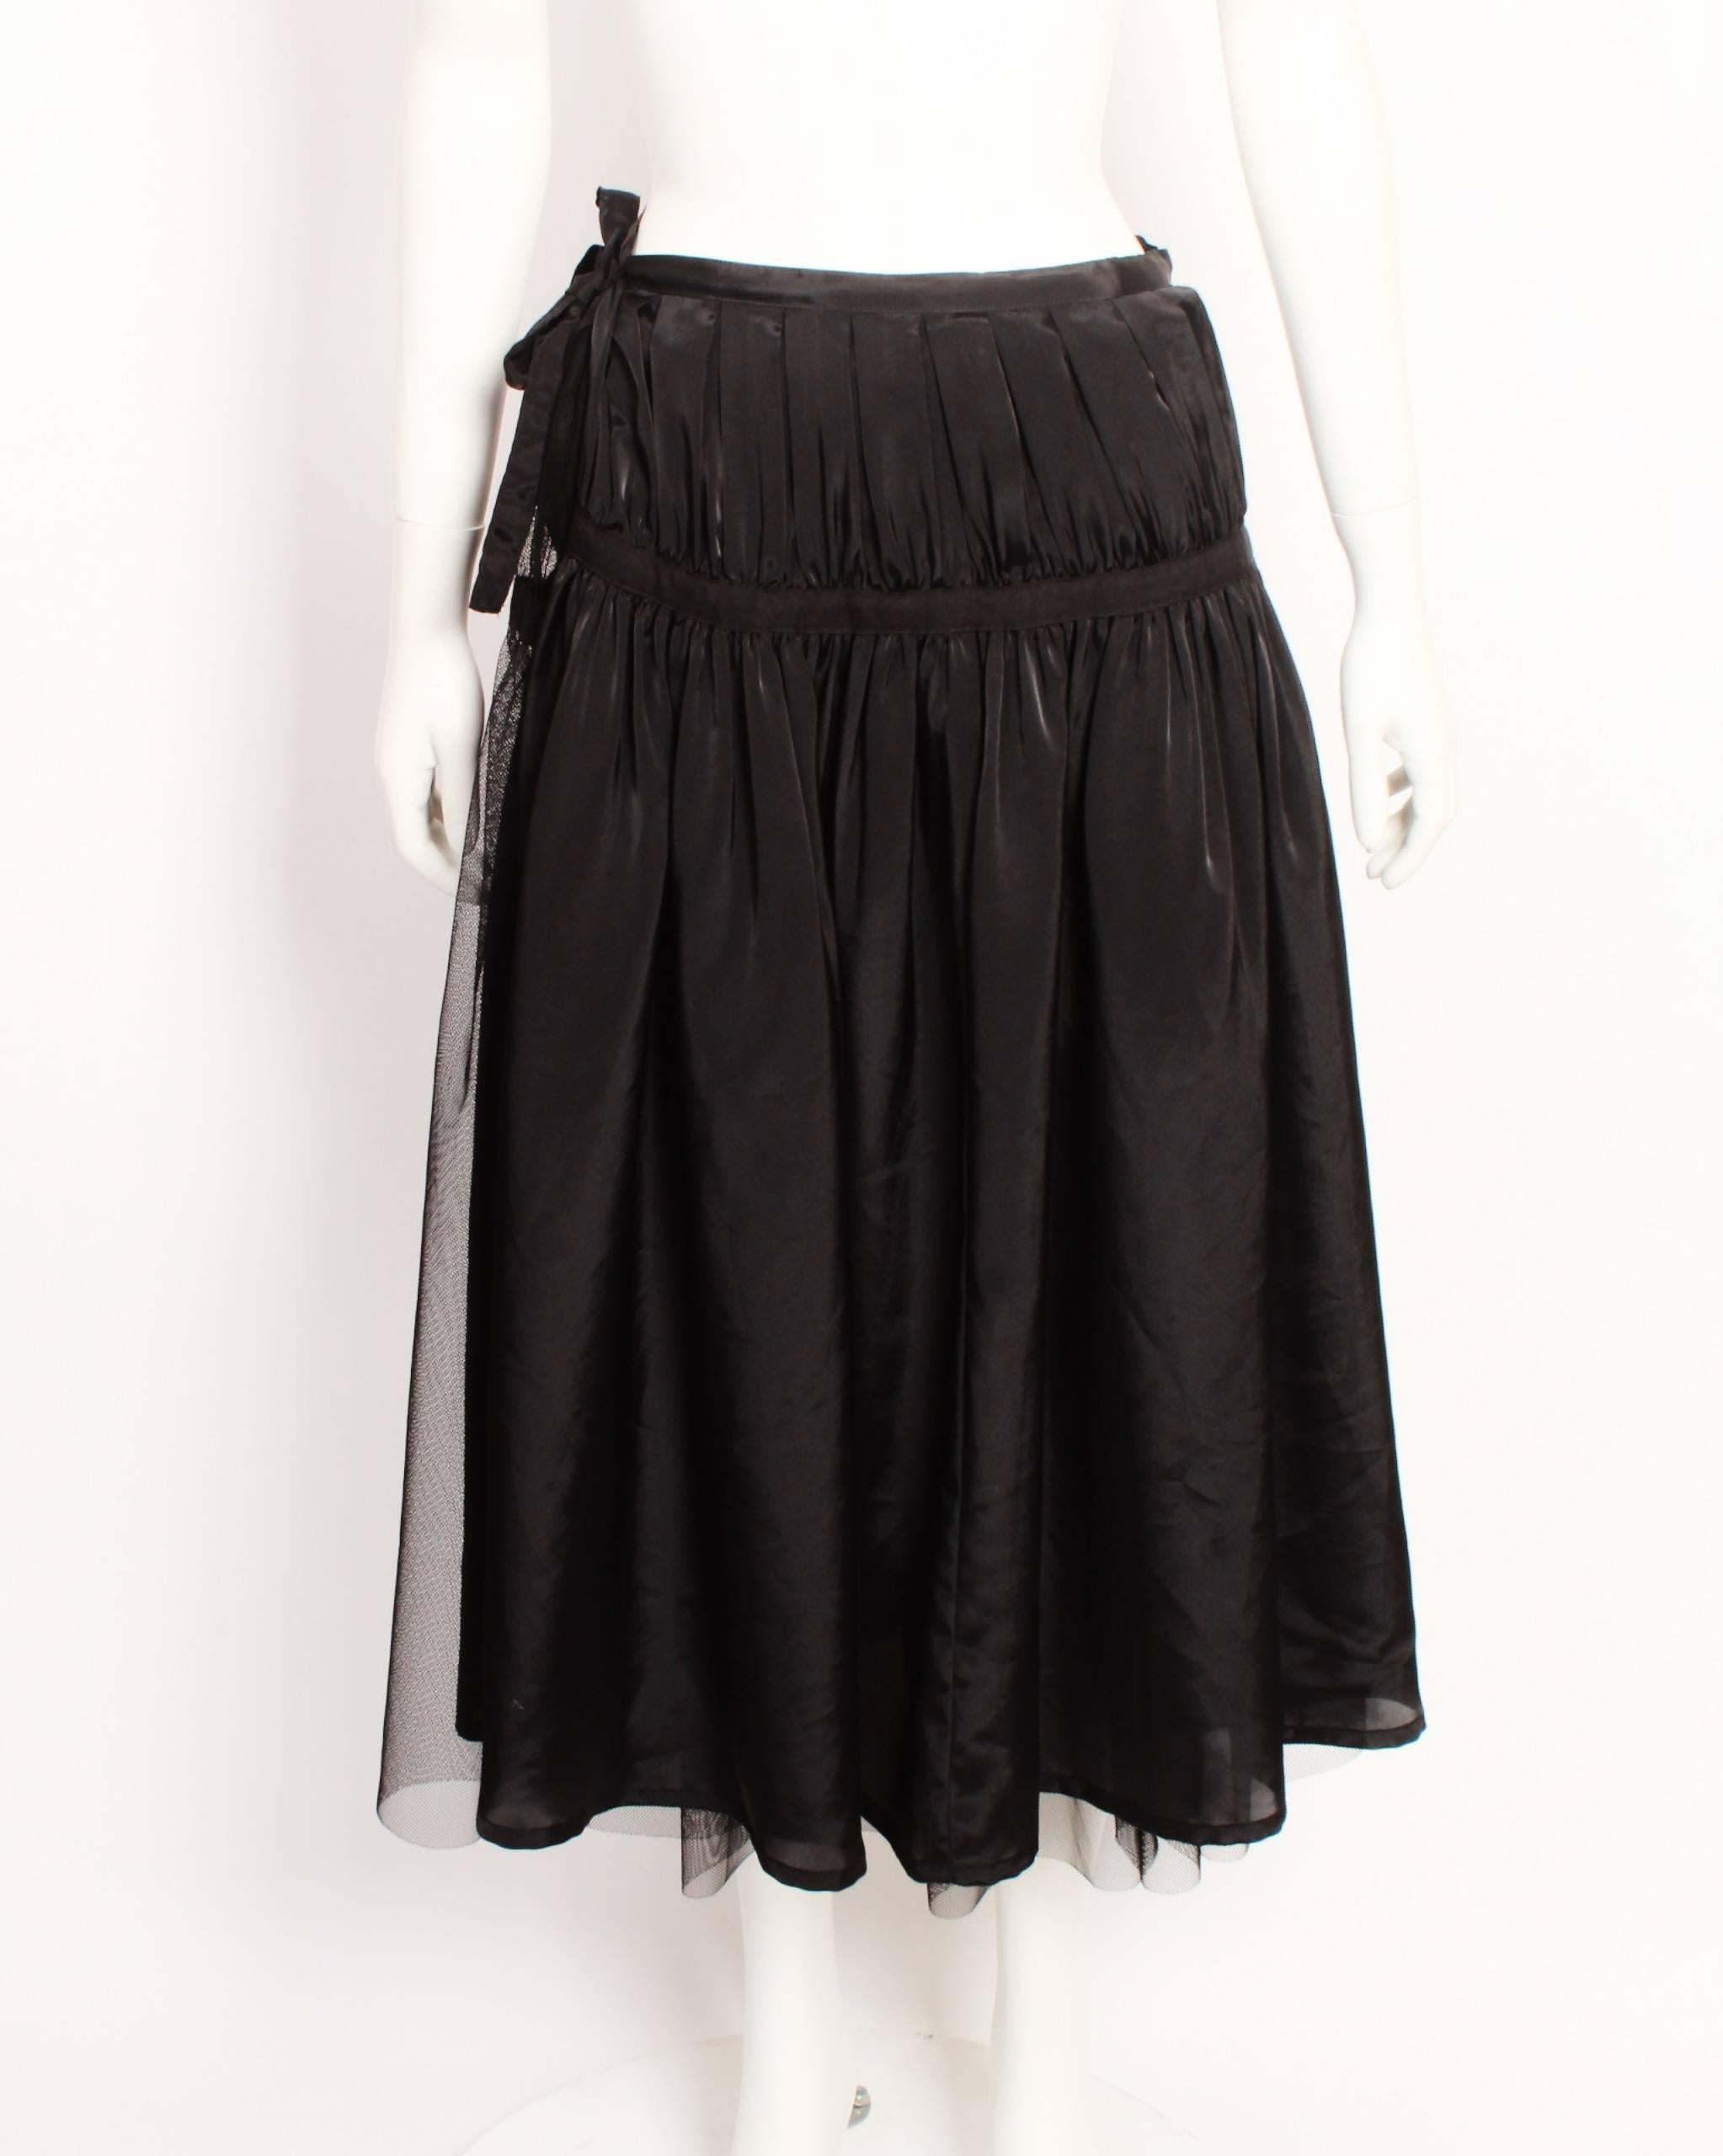 Tricot by Comme Des Garcons black tulle wrap skirt features a net skirt and solid underskirt that zip together. The silhouette is full and gathered with strips of of cotton tape that run around the waist and hipline. These hold the gathers in place